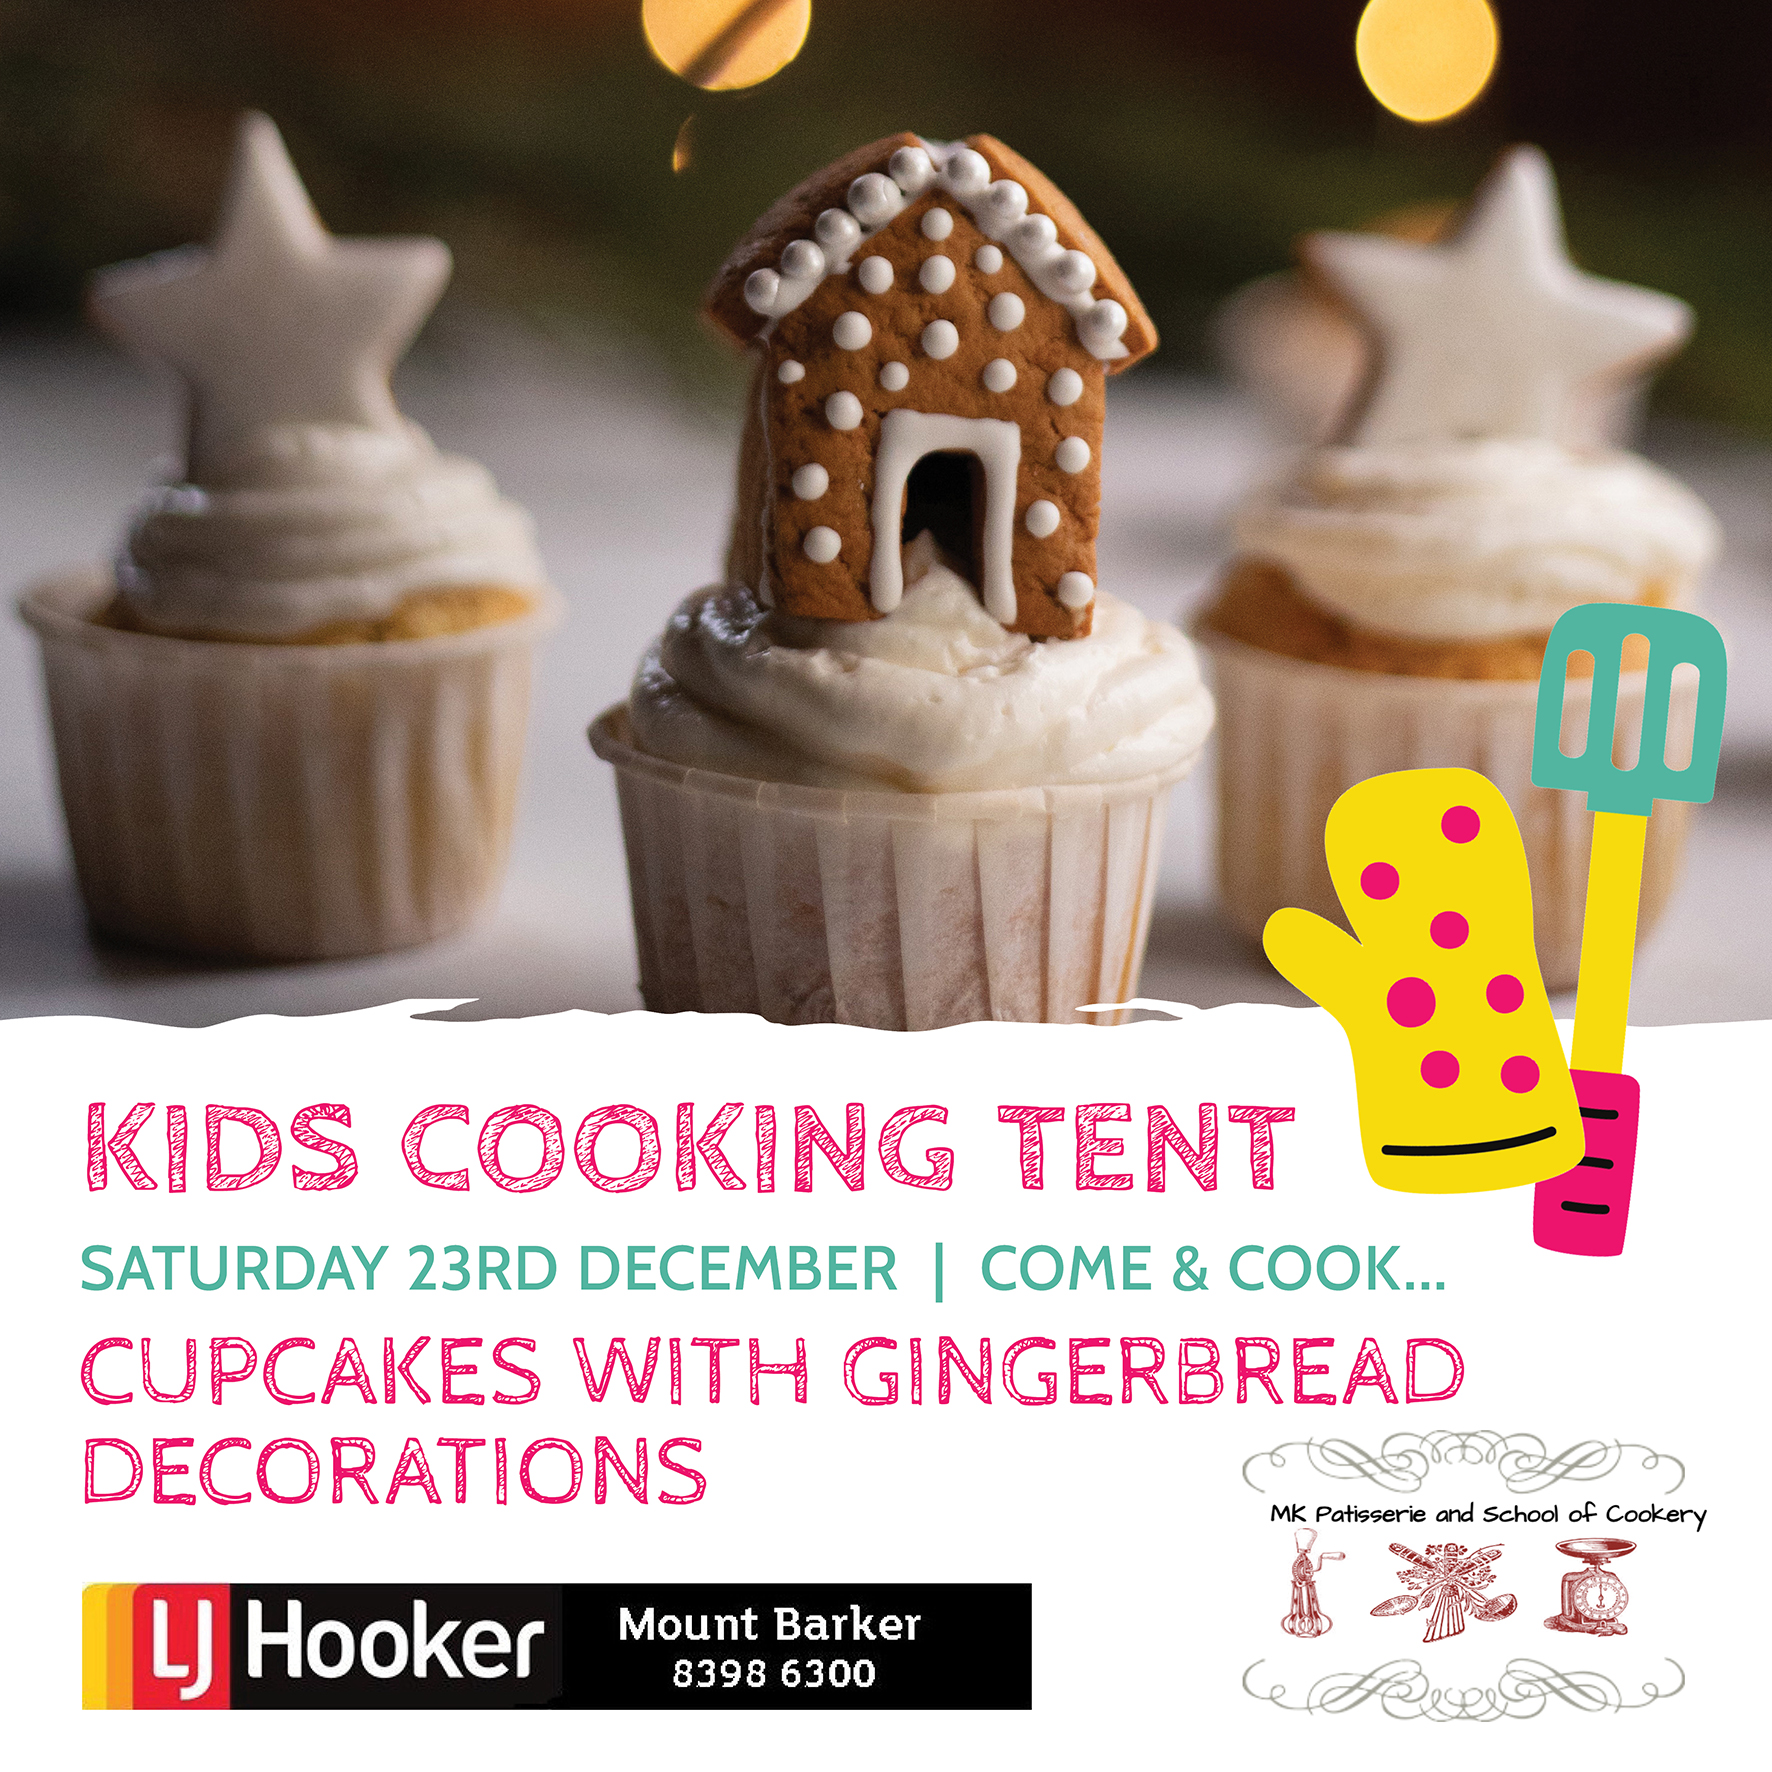 Kids cooking tent Saturday 23rd December. Come and cook cupcakes with gingerbread decorations